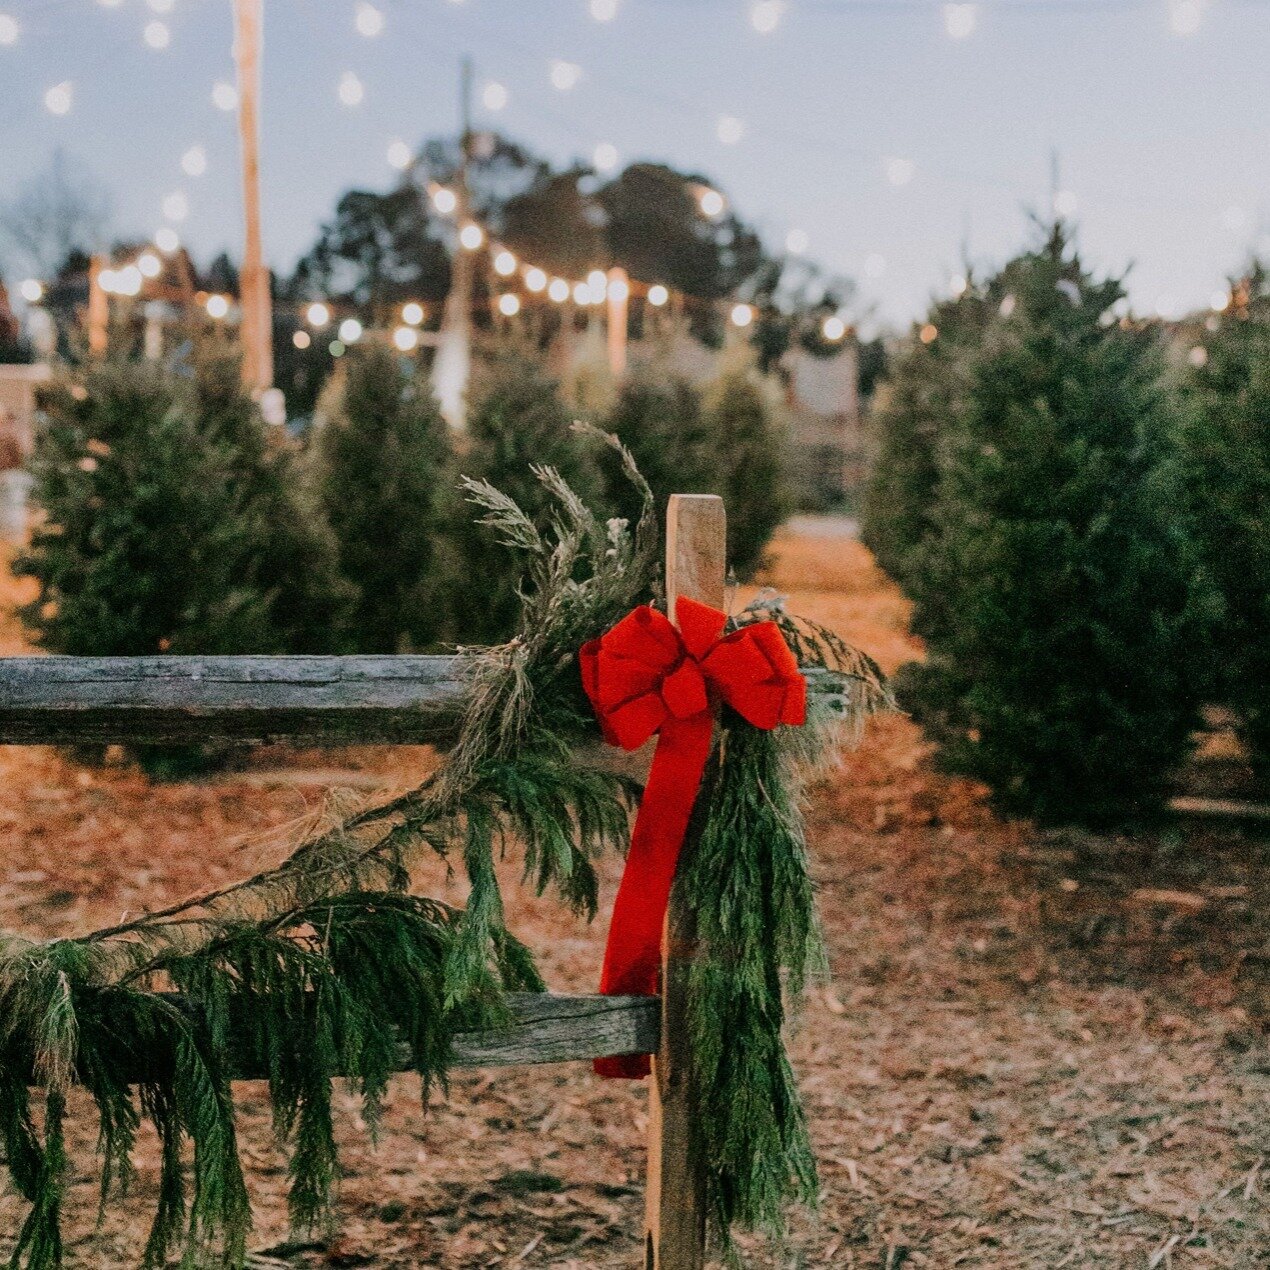 Looking for some Holiday cheer!? 🎅🎄We have three fun holiday activities for you!⁠
⁠
1. Visit @thehunterfarm! Enjoy a petting farm, pick your Christmas tree, and enjoy other holiday events 🐑⁠
⁠
2. Light the Knights with @knightsbaseball! Includes a